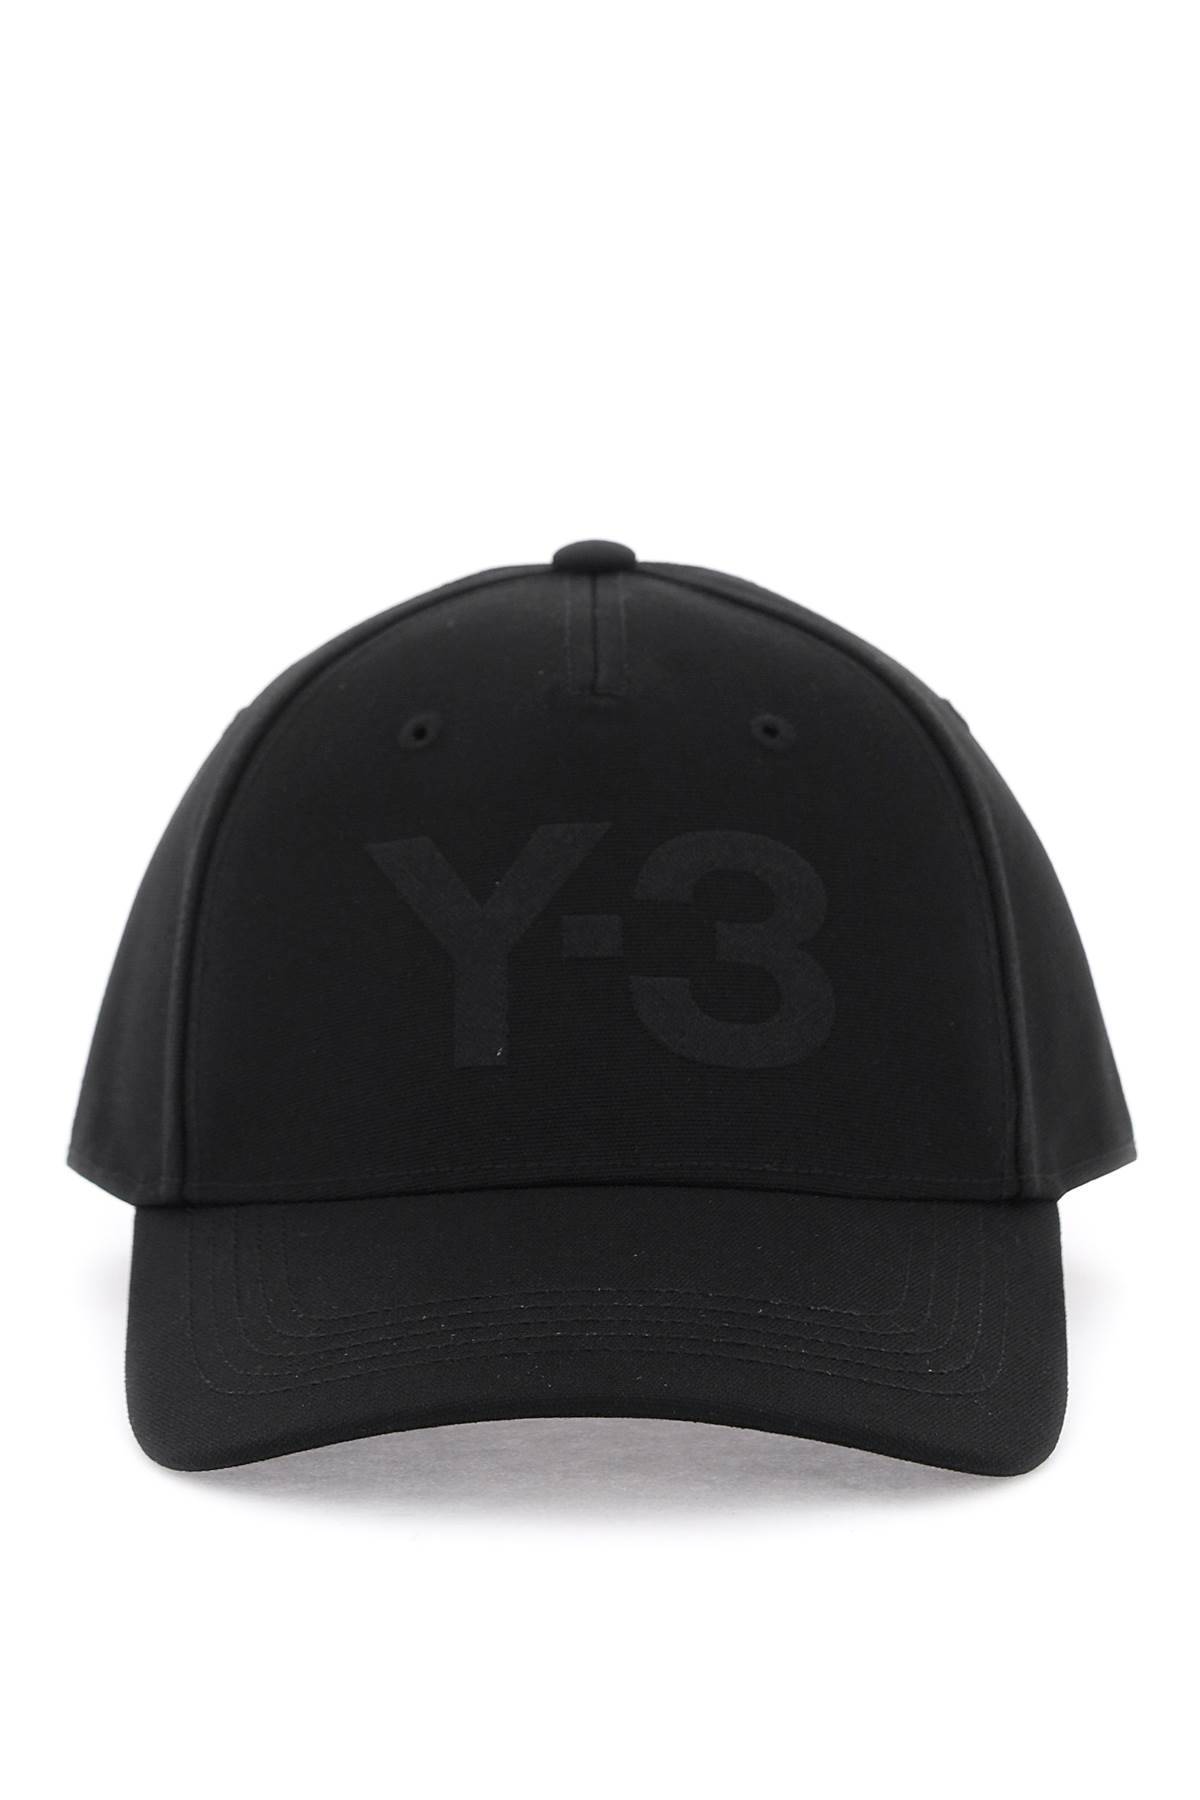 Y-3 Y-3 baseball cap with embroidered logo